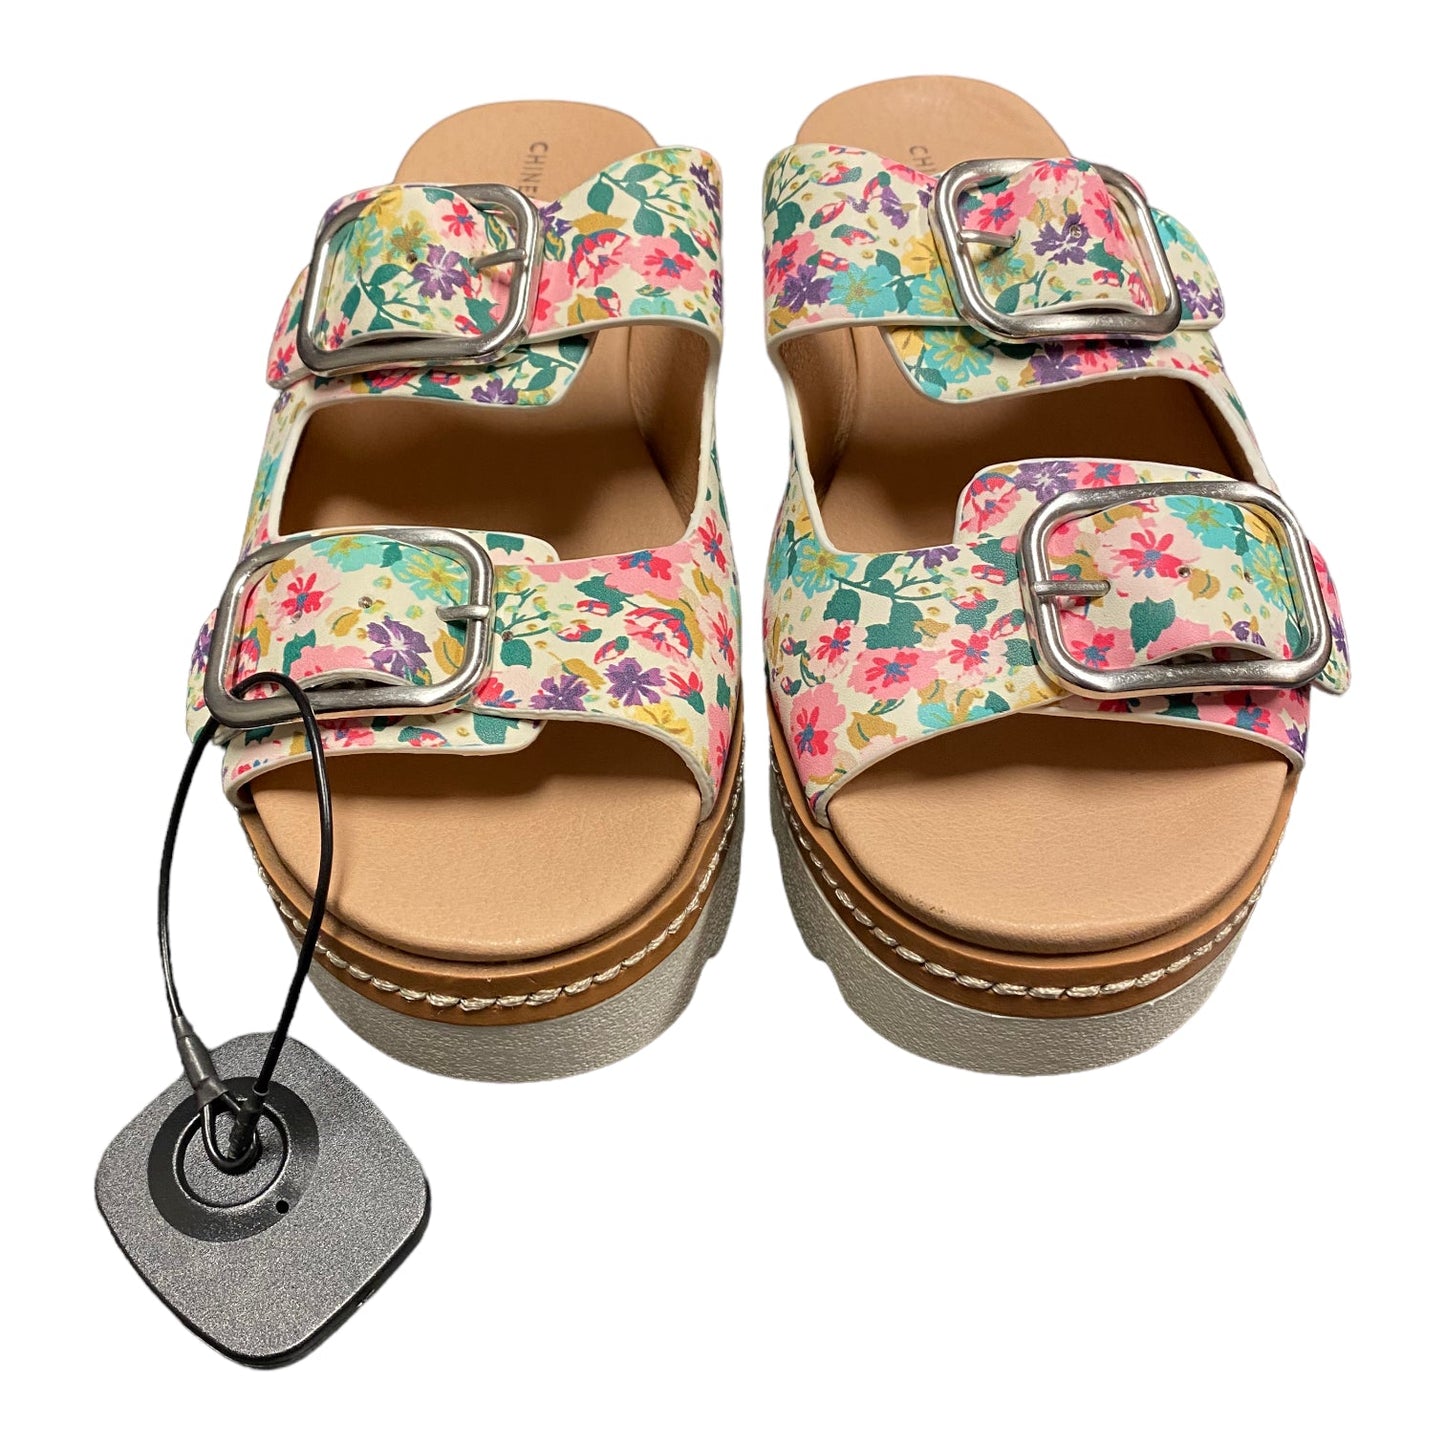 Floral Print Sandals Flats Chinese Laundry, Size 6.5